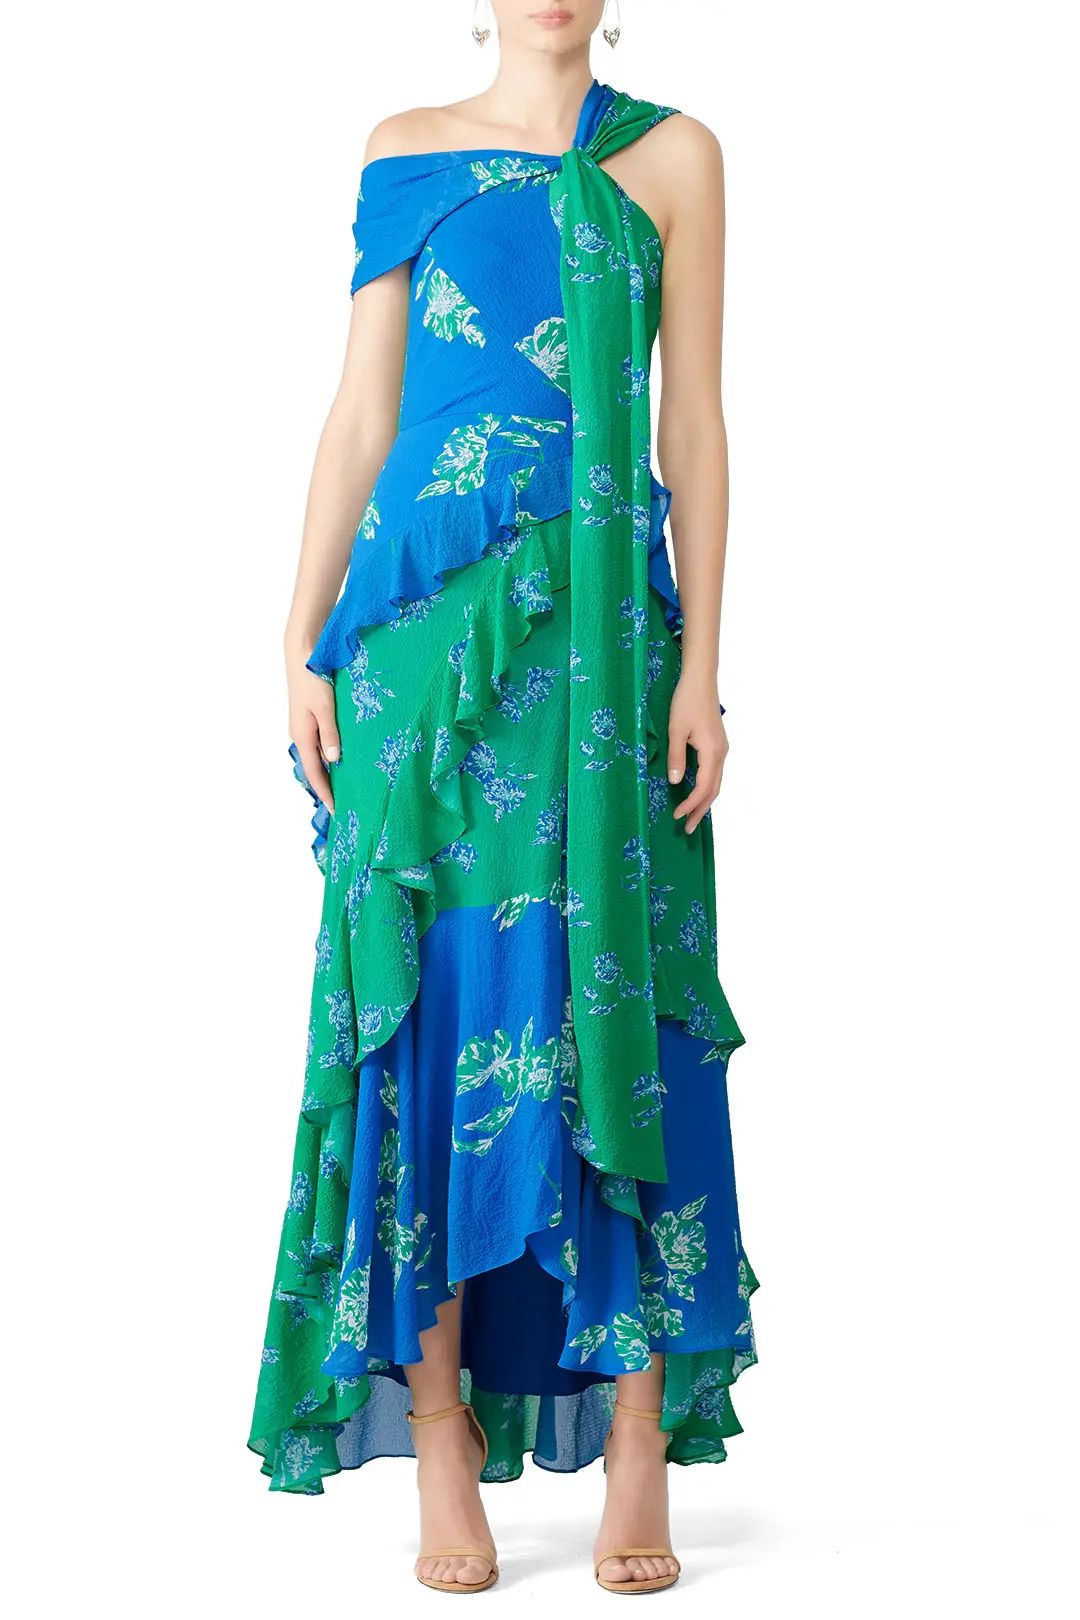 Tanya Taylor Graphic Floral Briella Gown | Rent The Runway